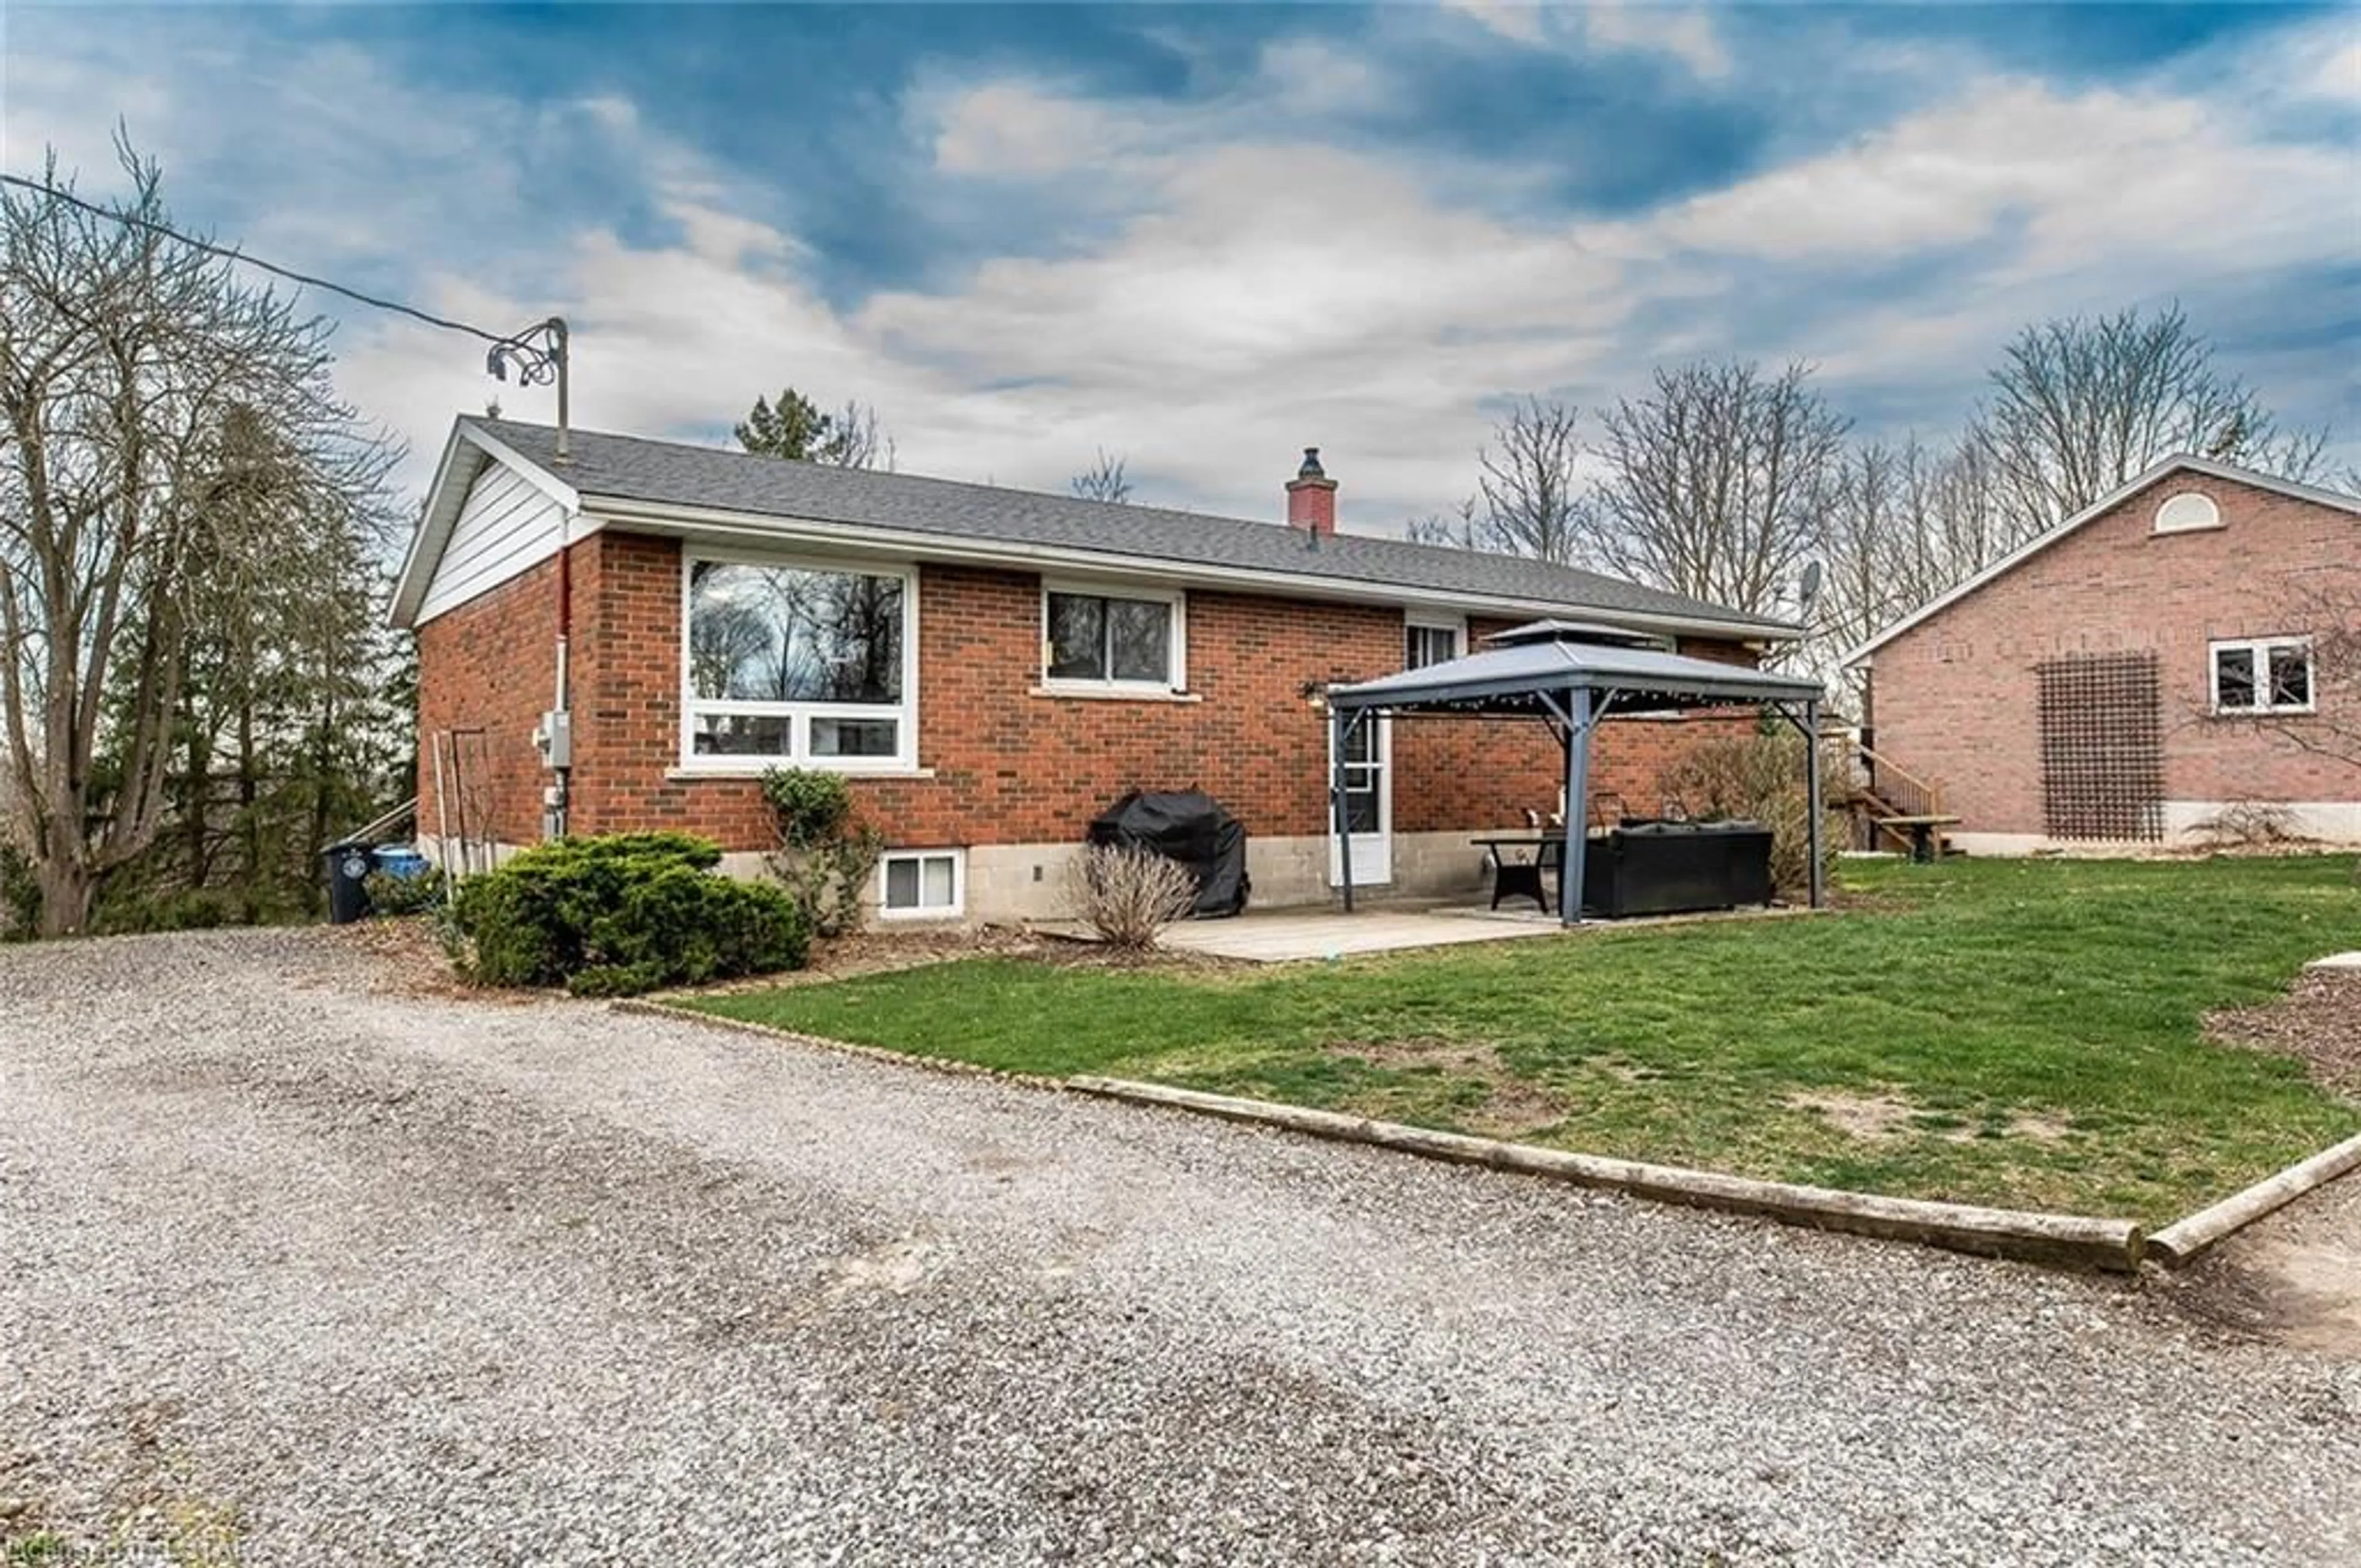 Home with brick exterior material for 110 Cowan Lane, St. Thomas Ontario N5P 2M1